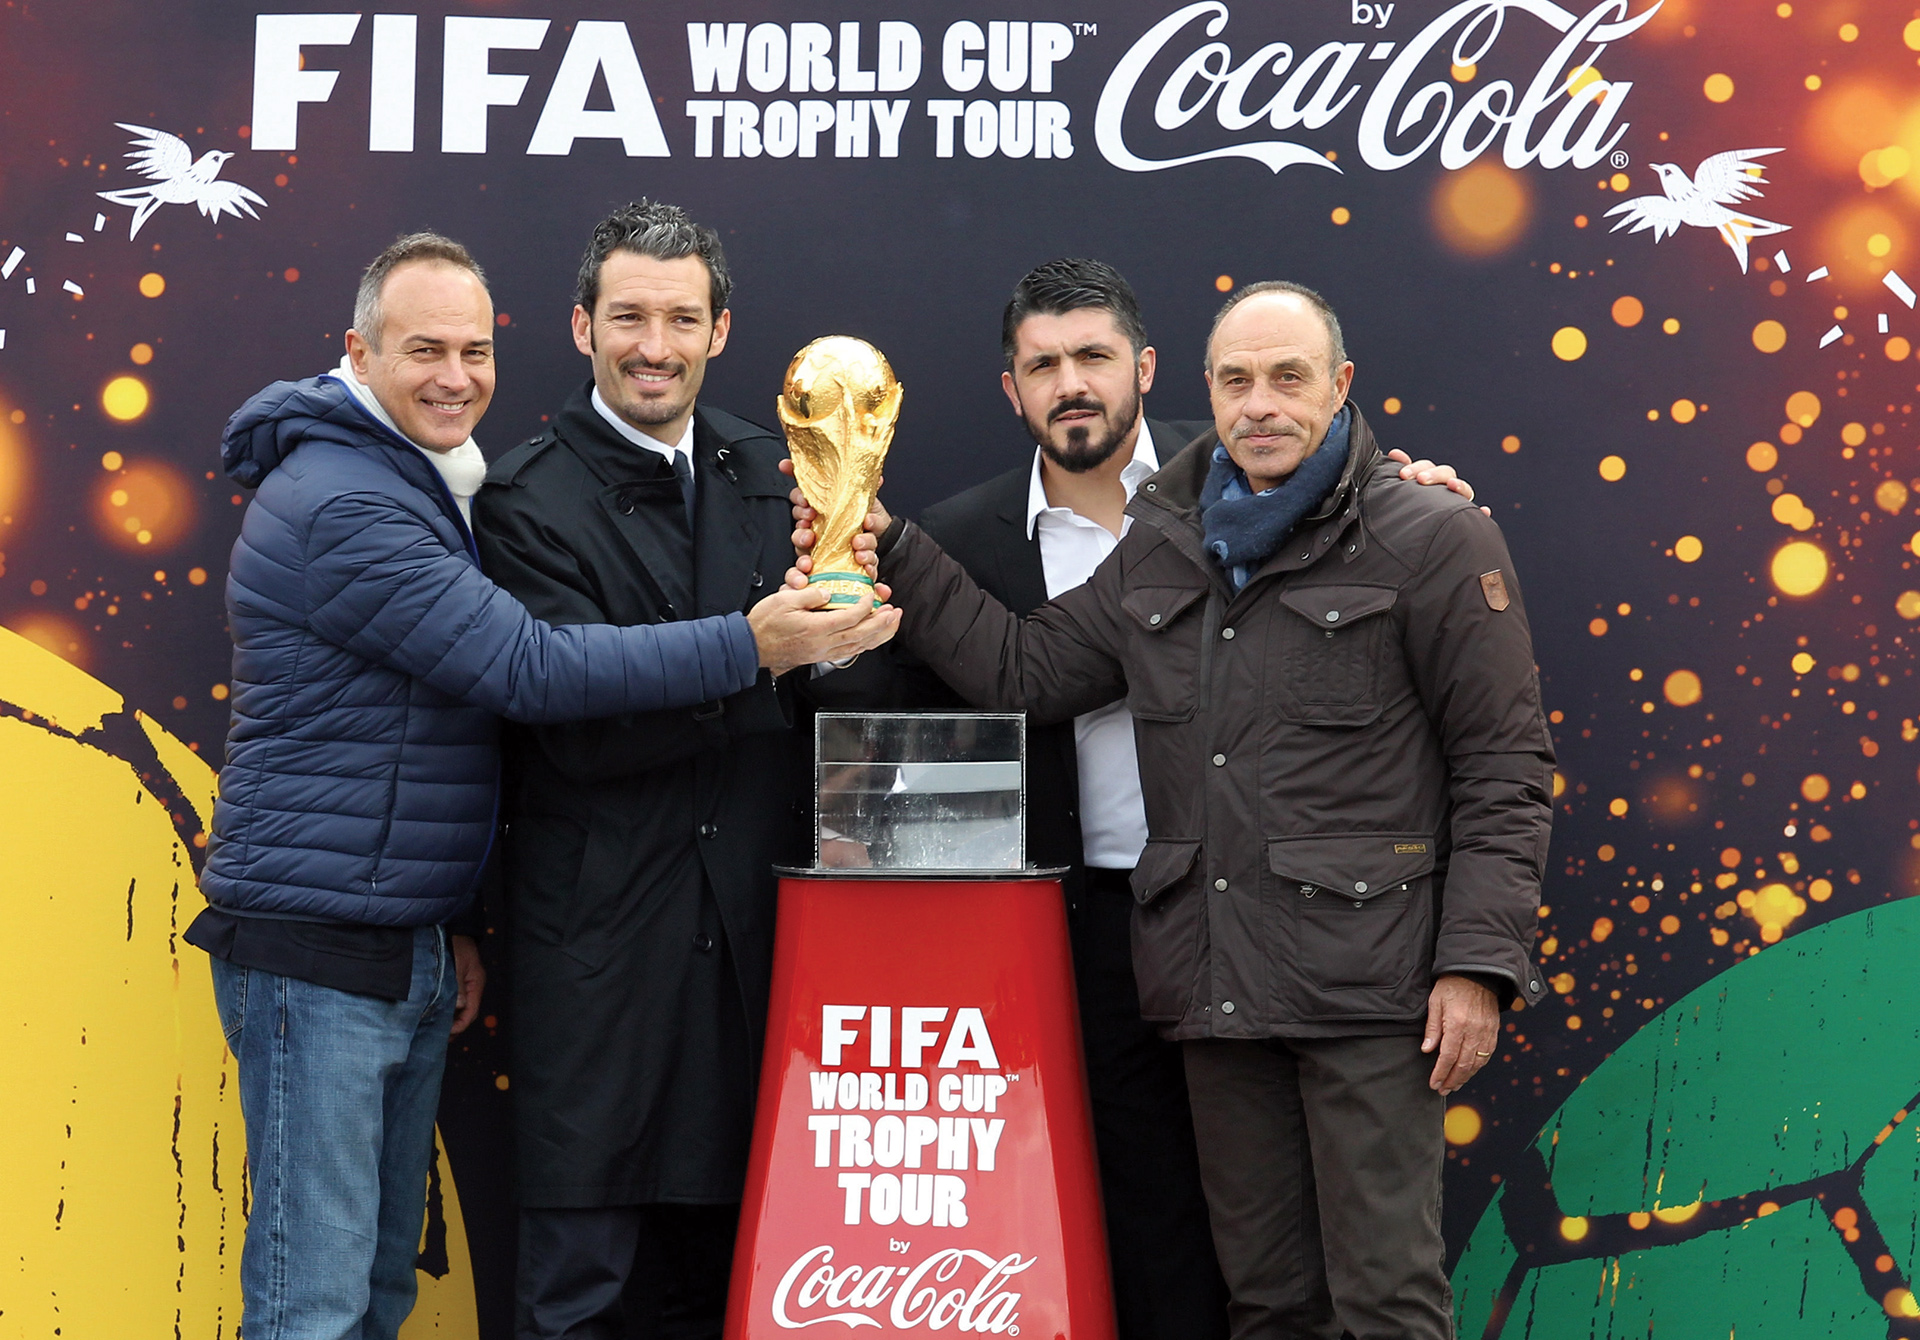 FIFA WORLD CUP TROPHY TOUR BY COCA-COLA